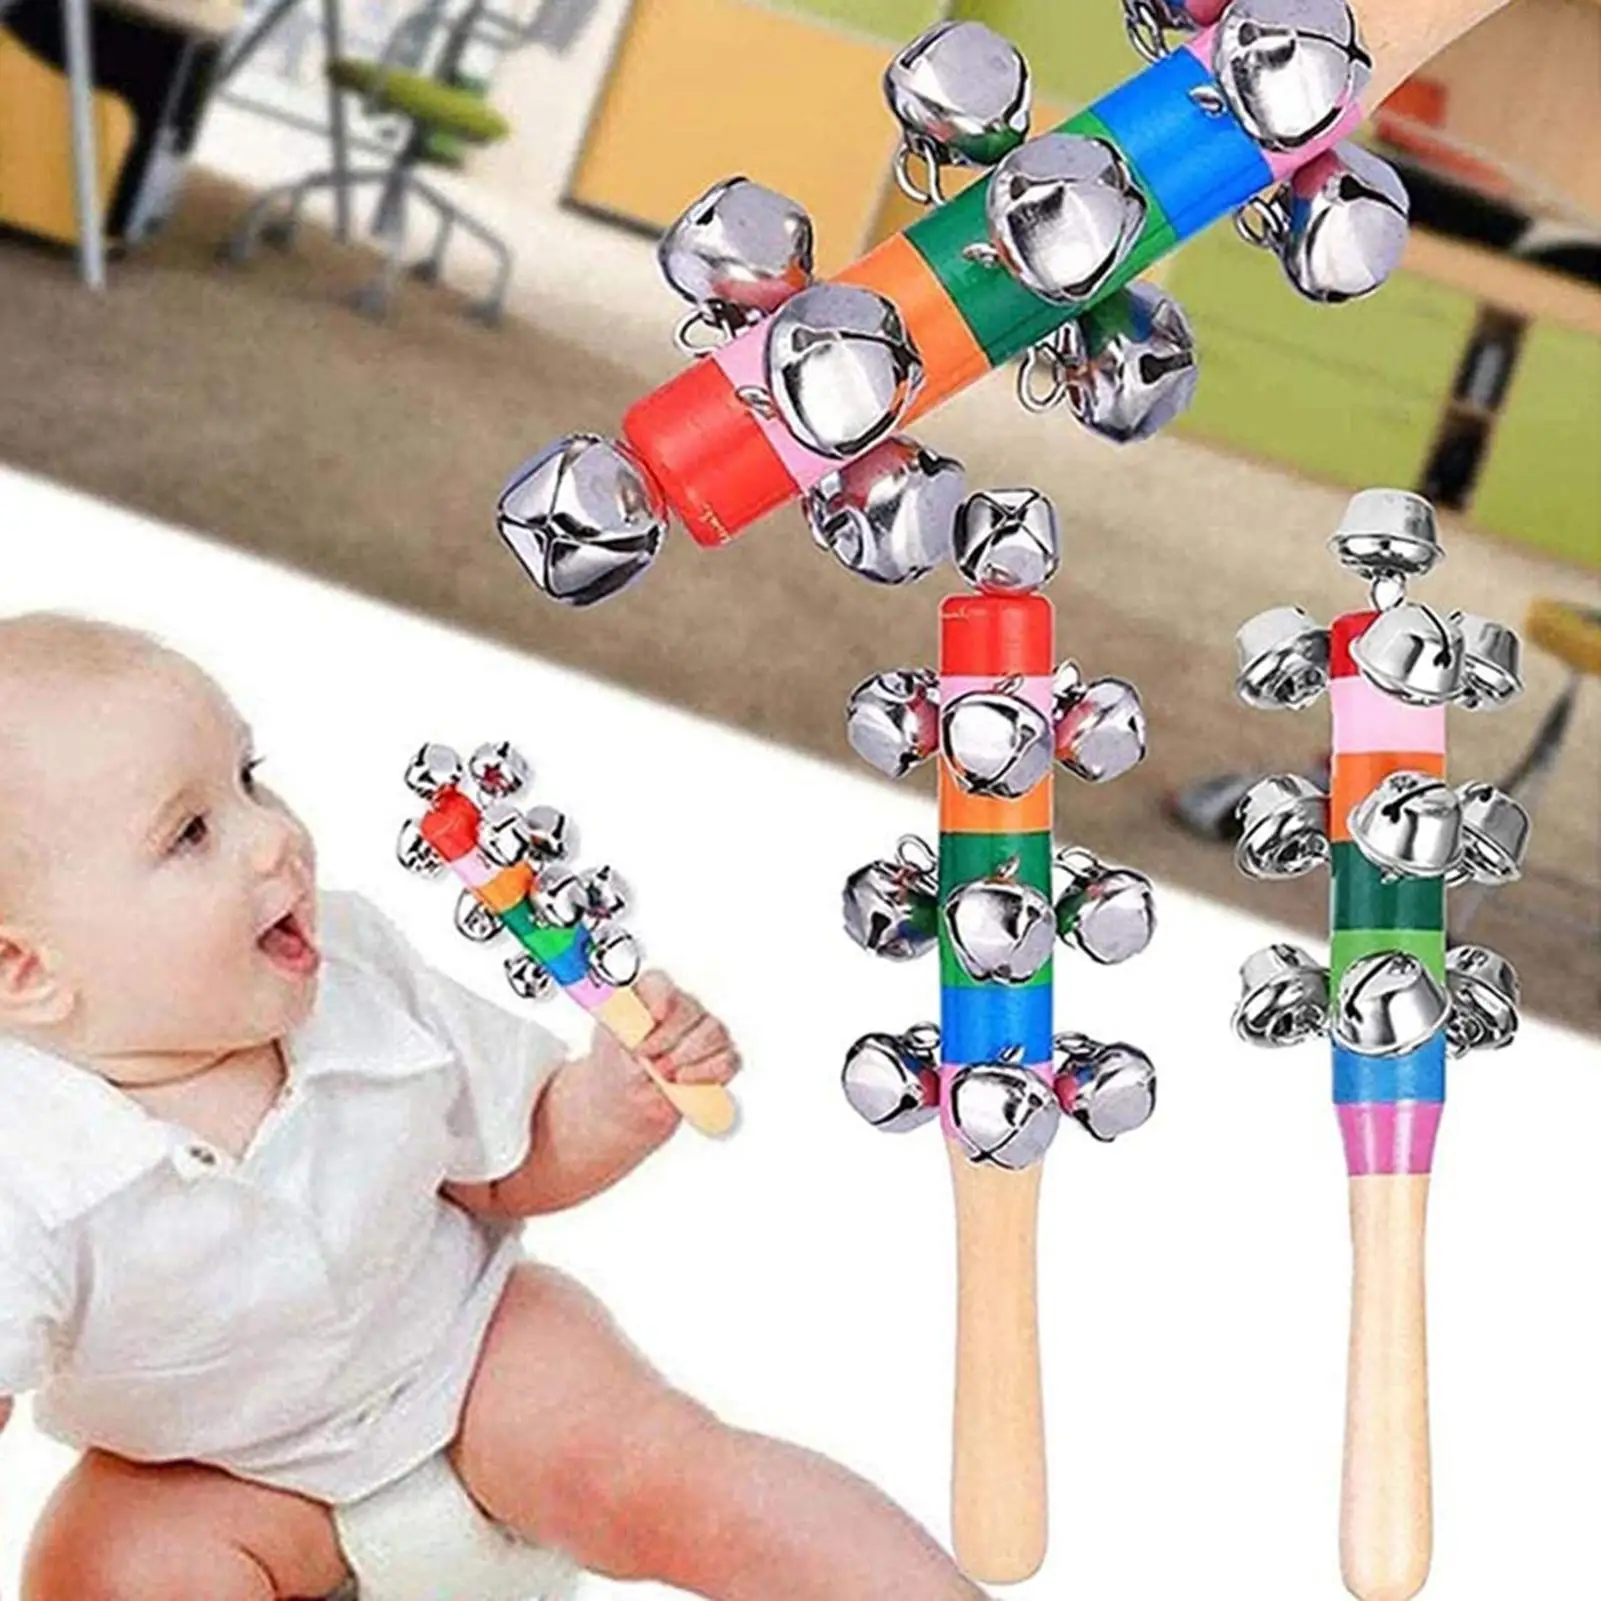 

Hot Sale 1pcs Cute Wooden Stick Rainbow Hand Shake Bell Baby Rattles Jingle Bells Infant Shaker Rattle Ring Educational Toy Gift